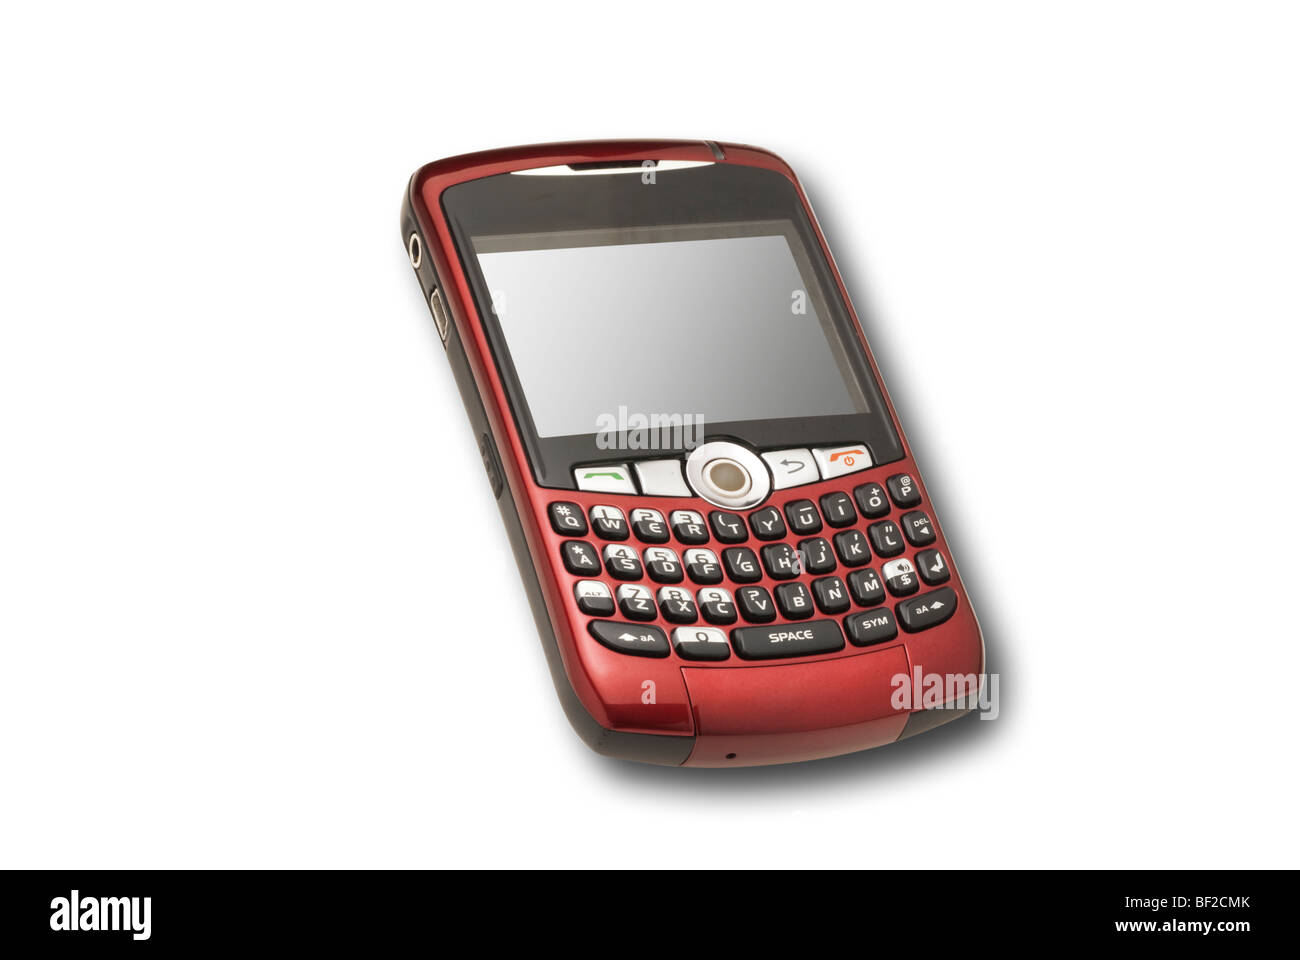 burgundy pda at right angle,isolated Stock Photo